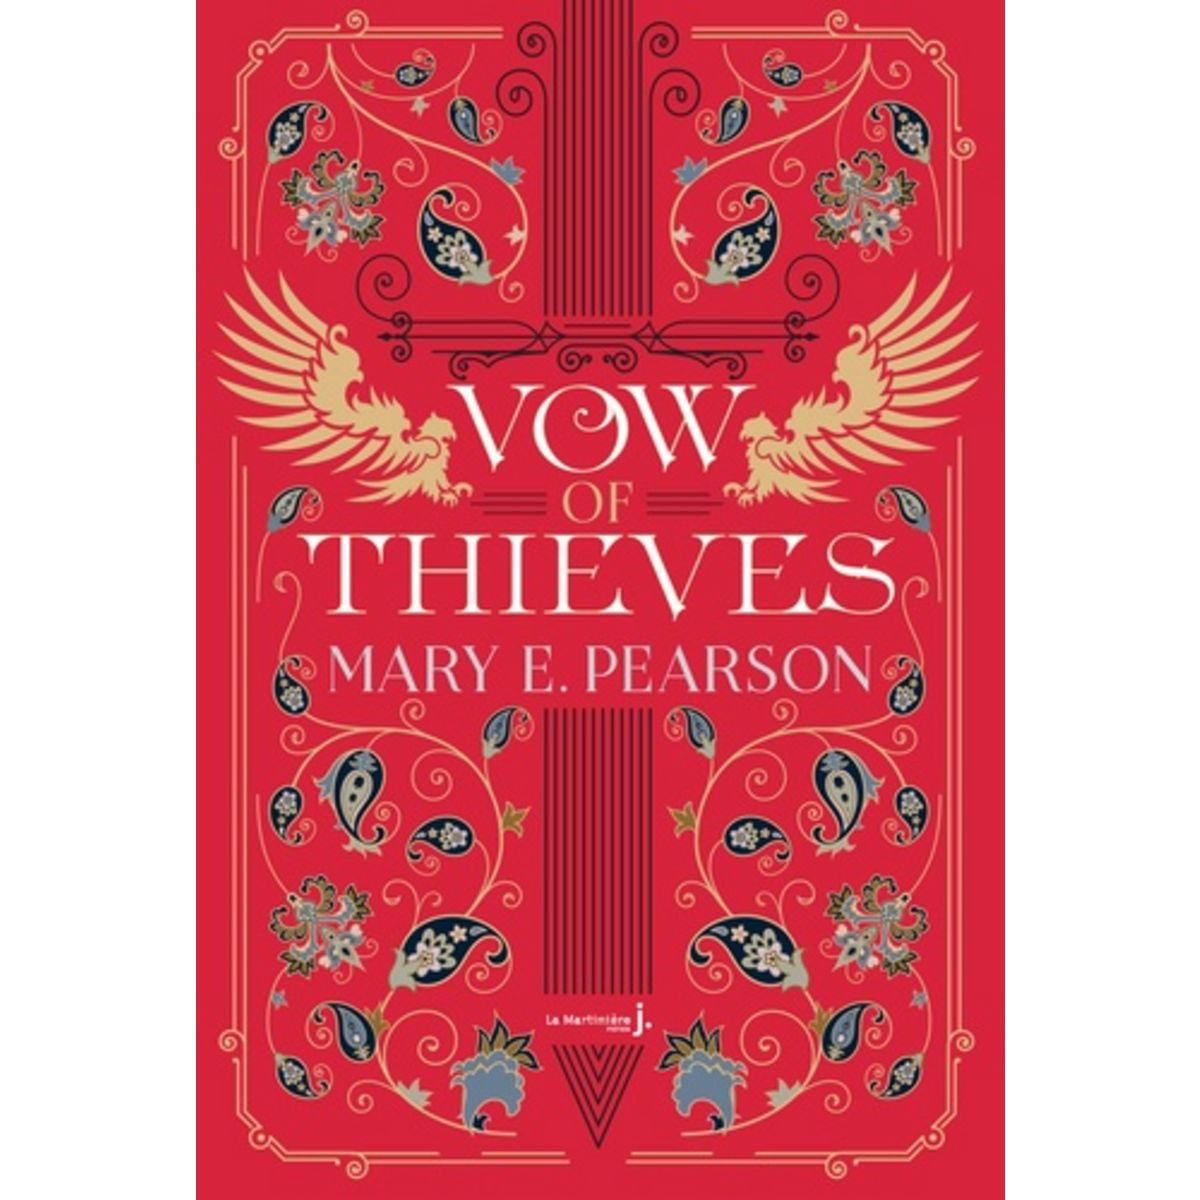  DANCE OF THIEVES TOME 2 : VOW OF THIEVES, Pearson Mary E.